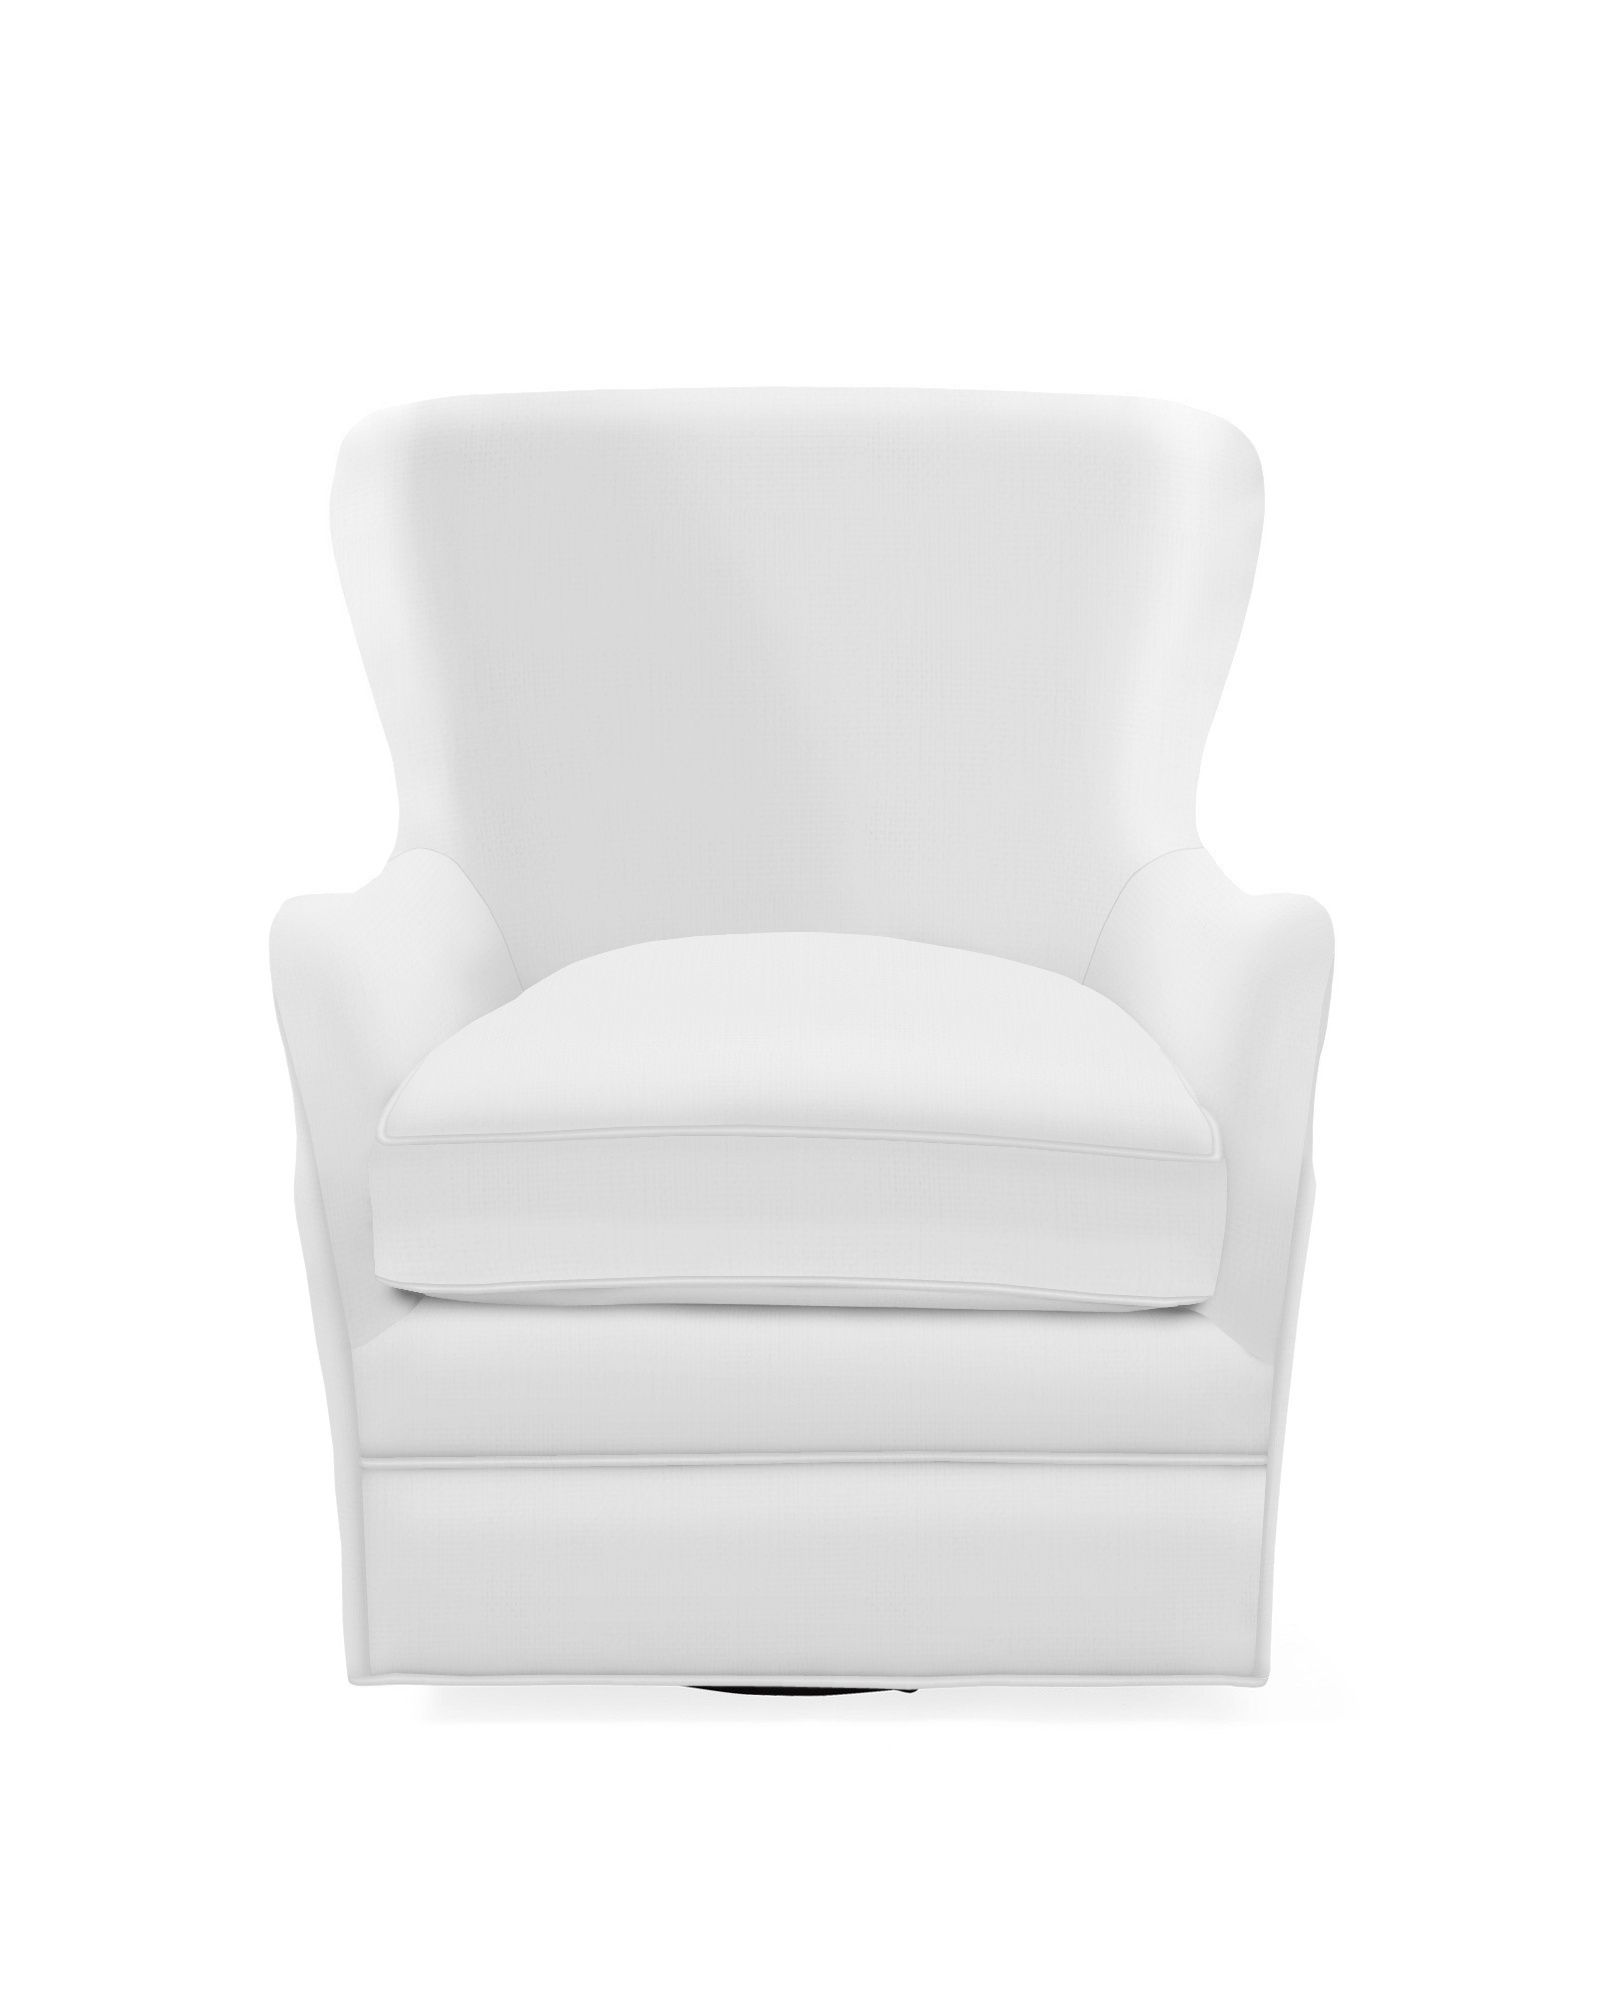 Thompson Swivel Chair | Serena and Lily